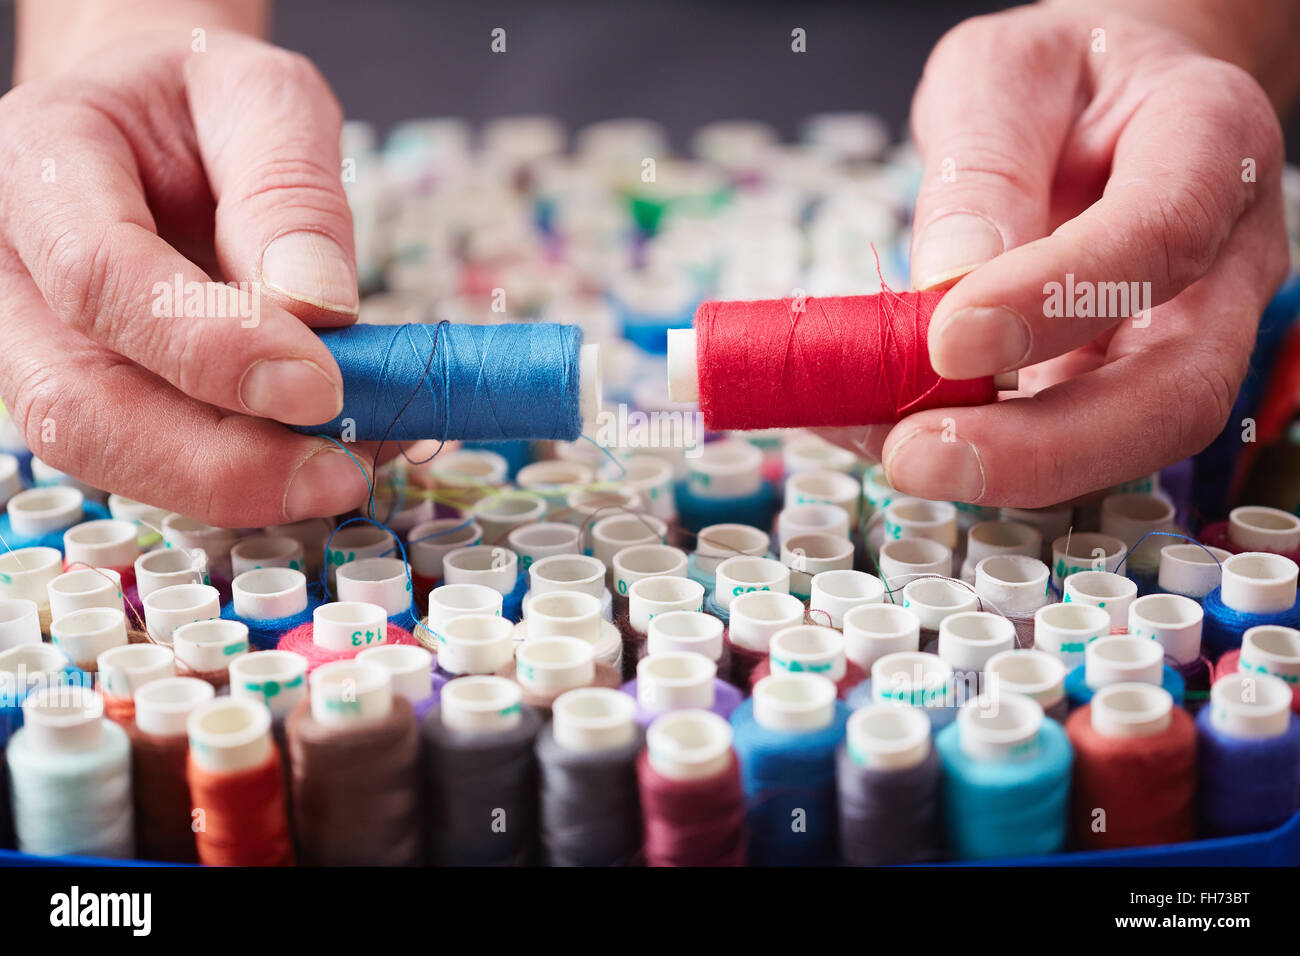 Tailor choosing between blue and red threads Stock Photo